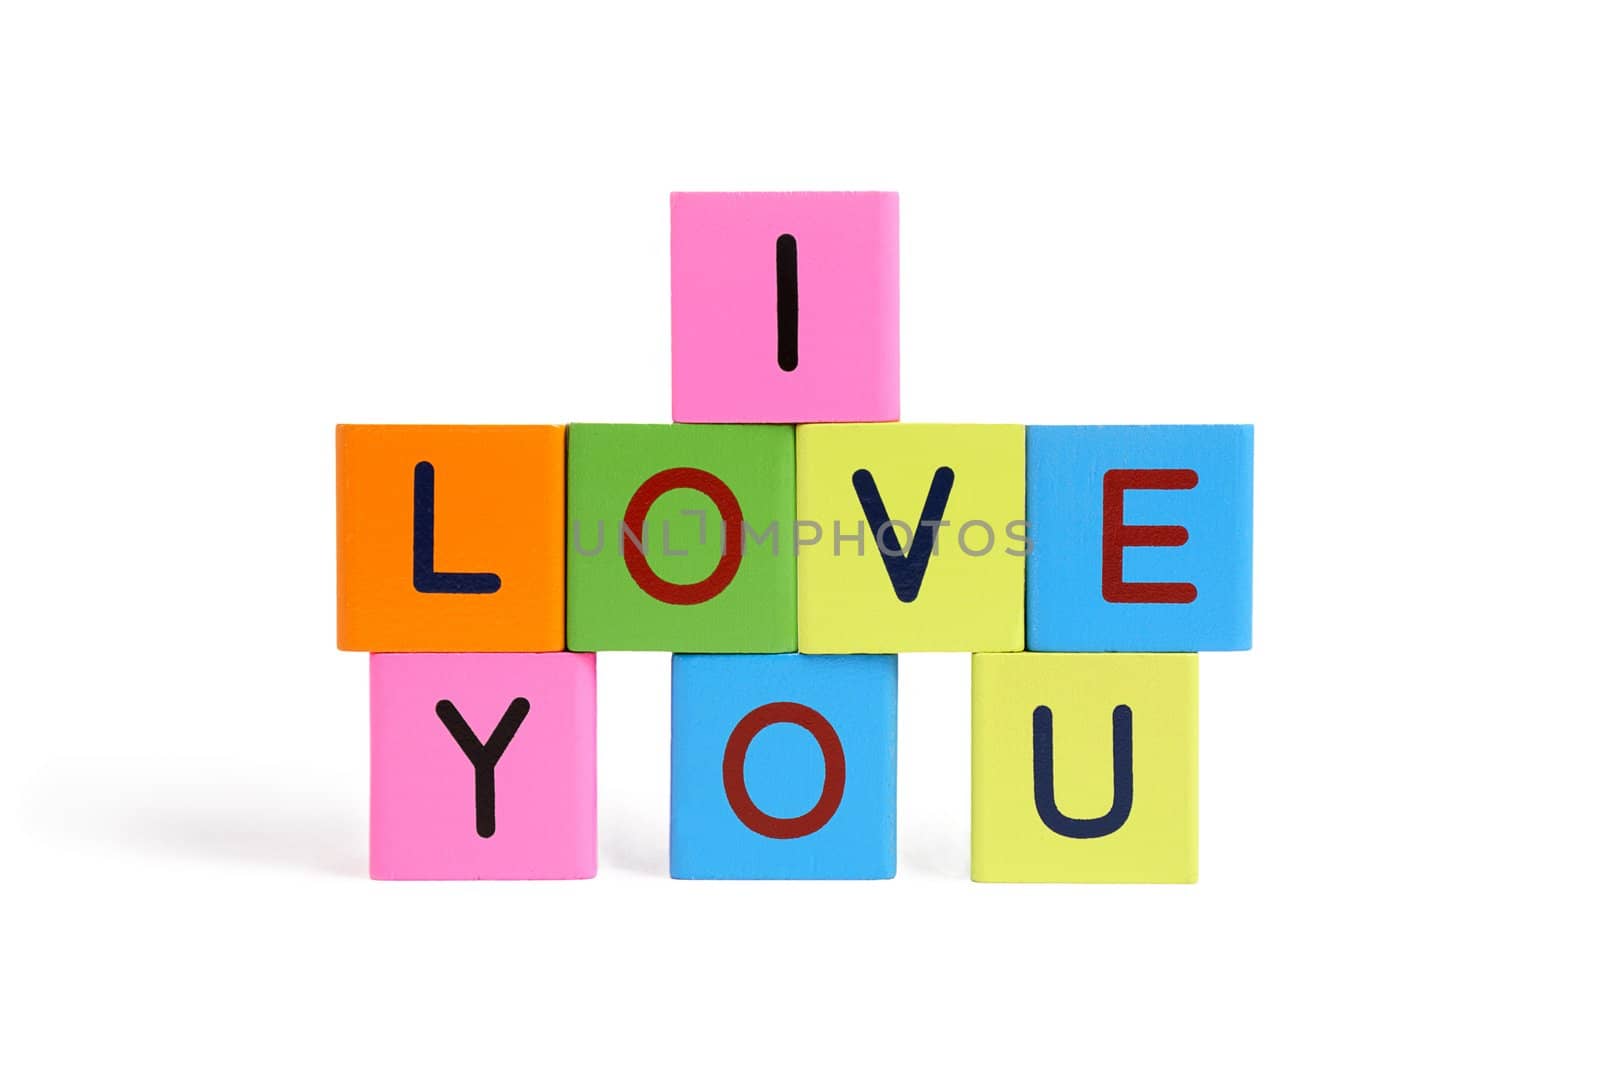 phrase "I love you" formed from wooden letter blocks